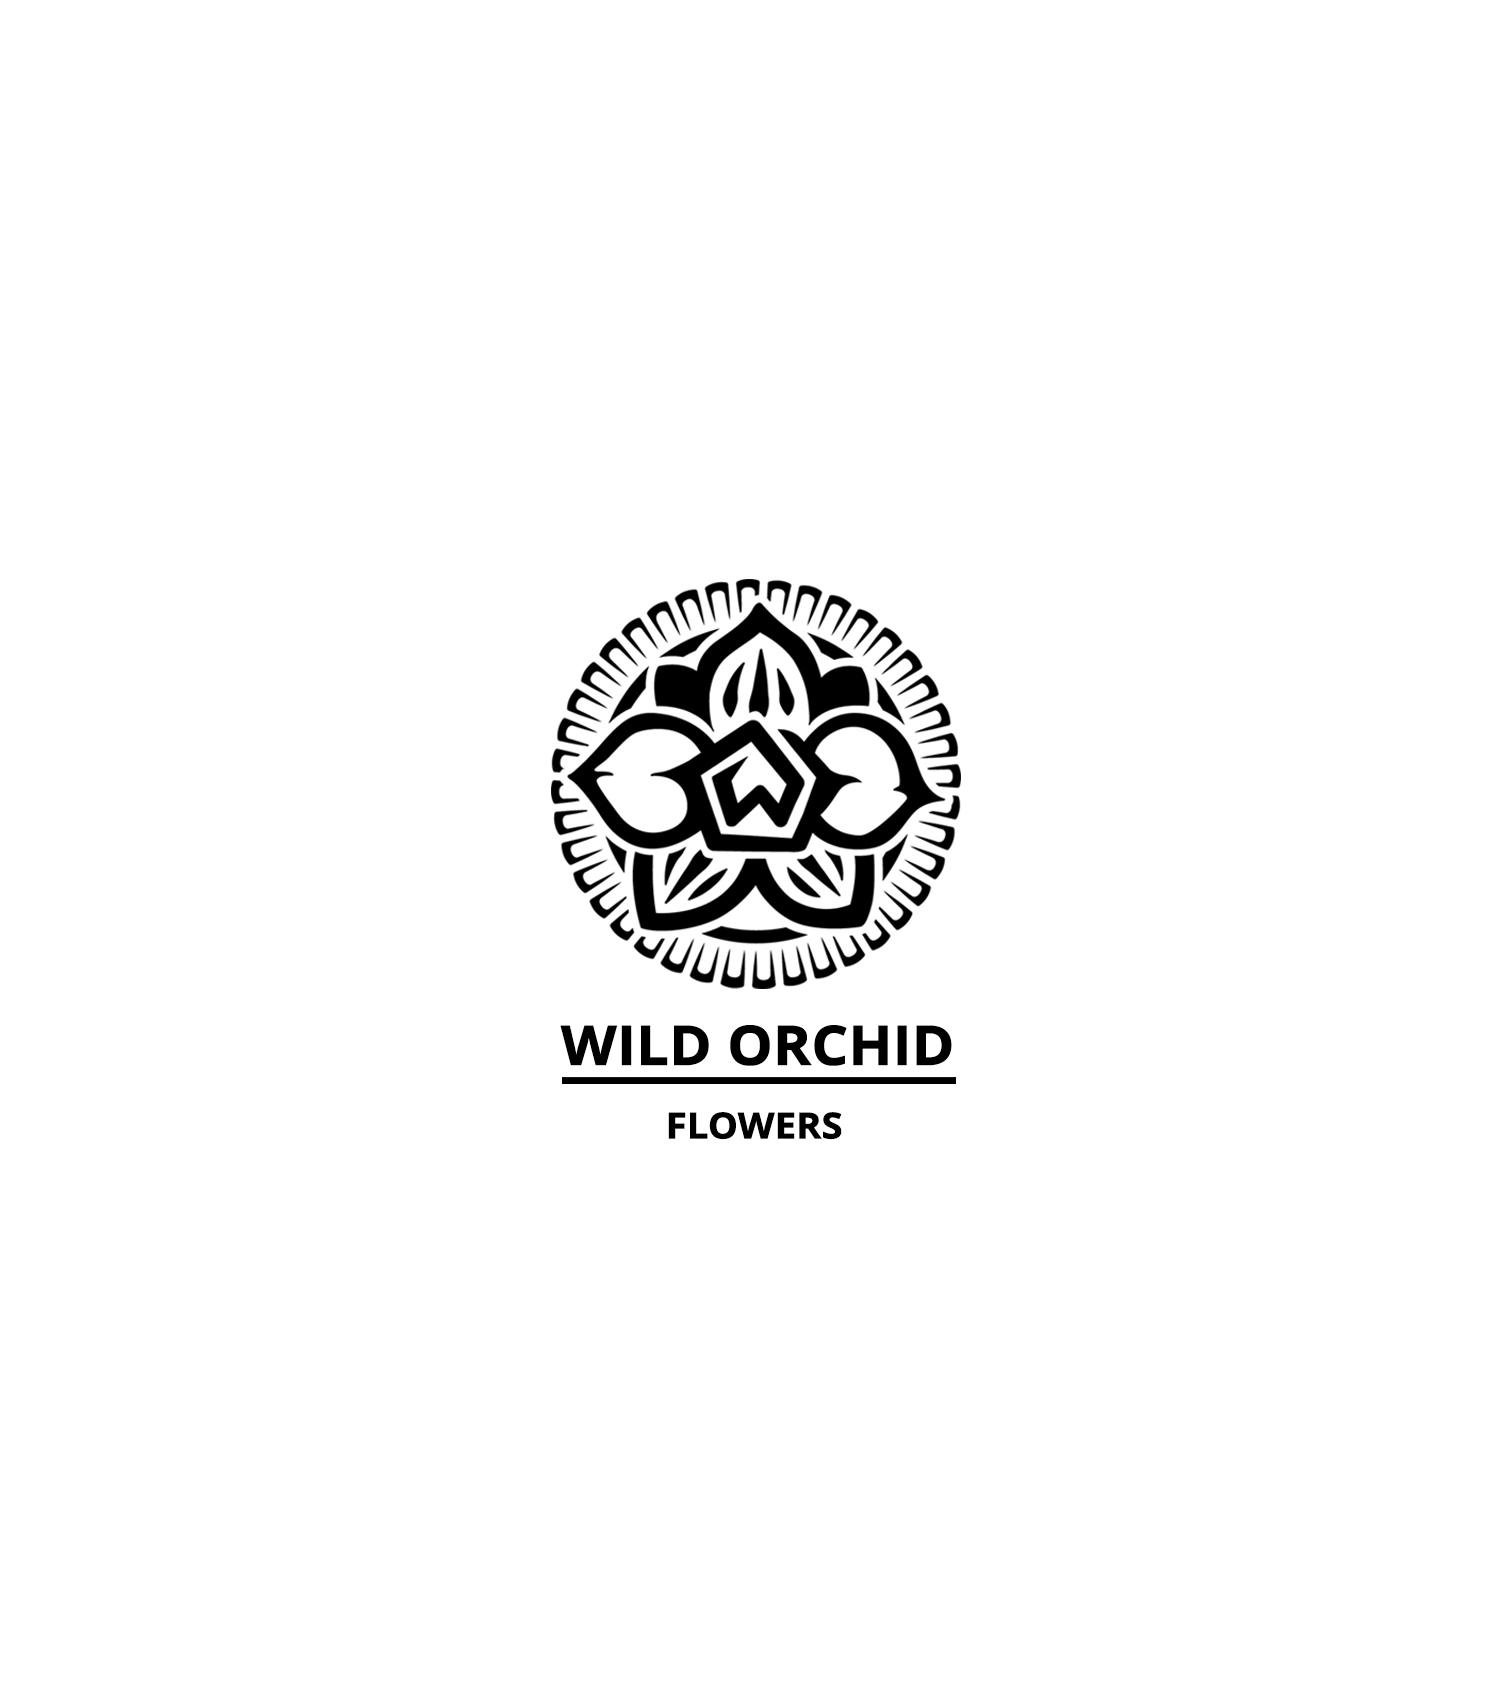 Orchid Flower Logo - Wild Orchid Flowers | Venzie Pascual